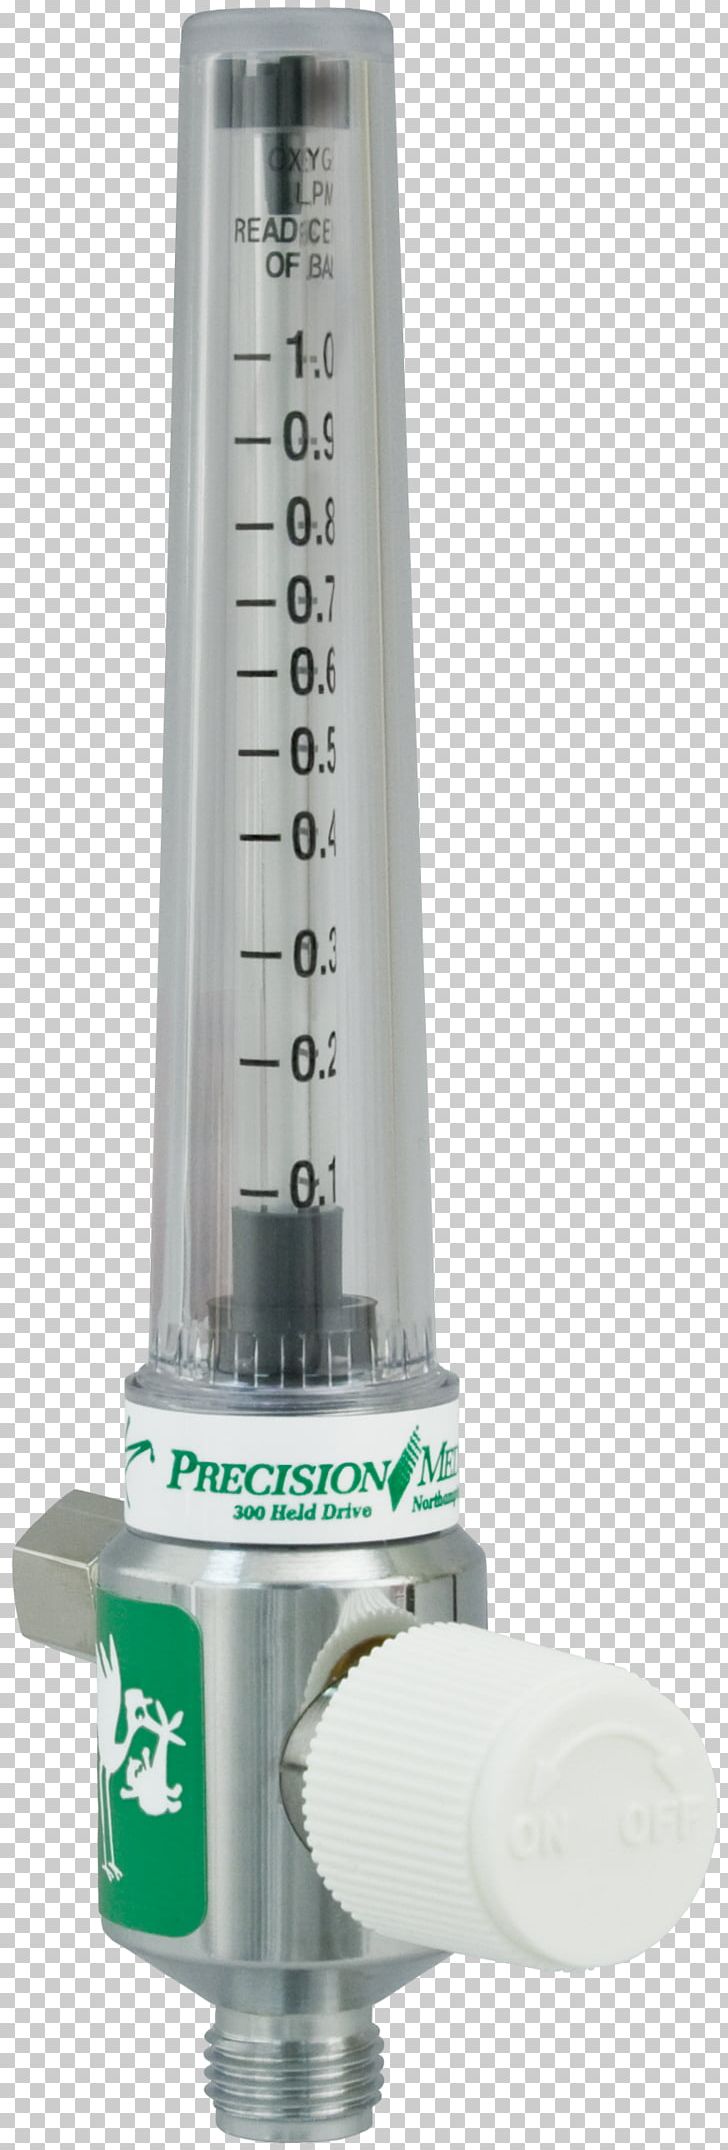 Product Design Computer Hardware PNG, Clipart, Art, Computer Hardware, Flowmeter, Hardware Free PNG Download